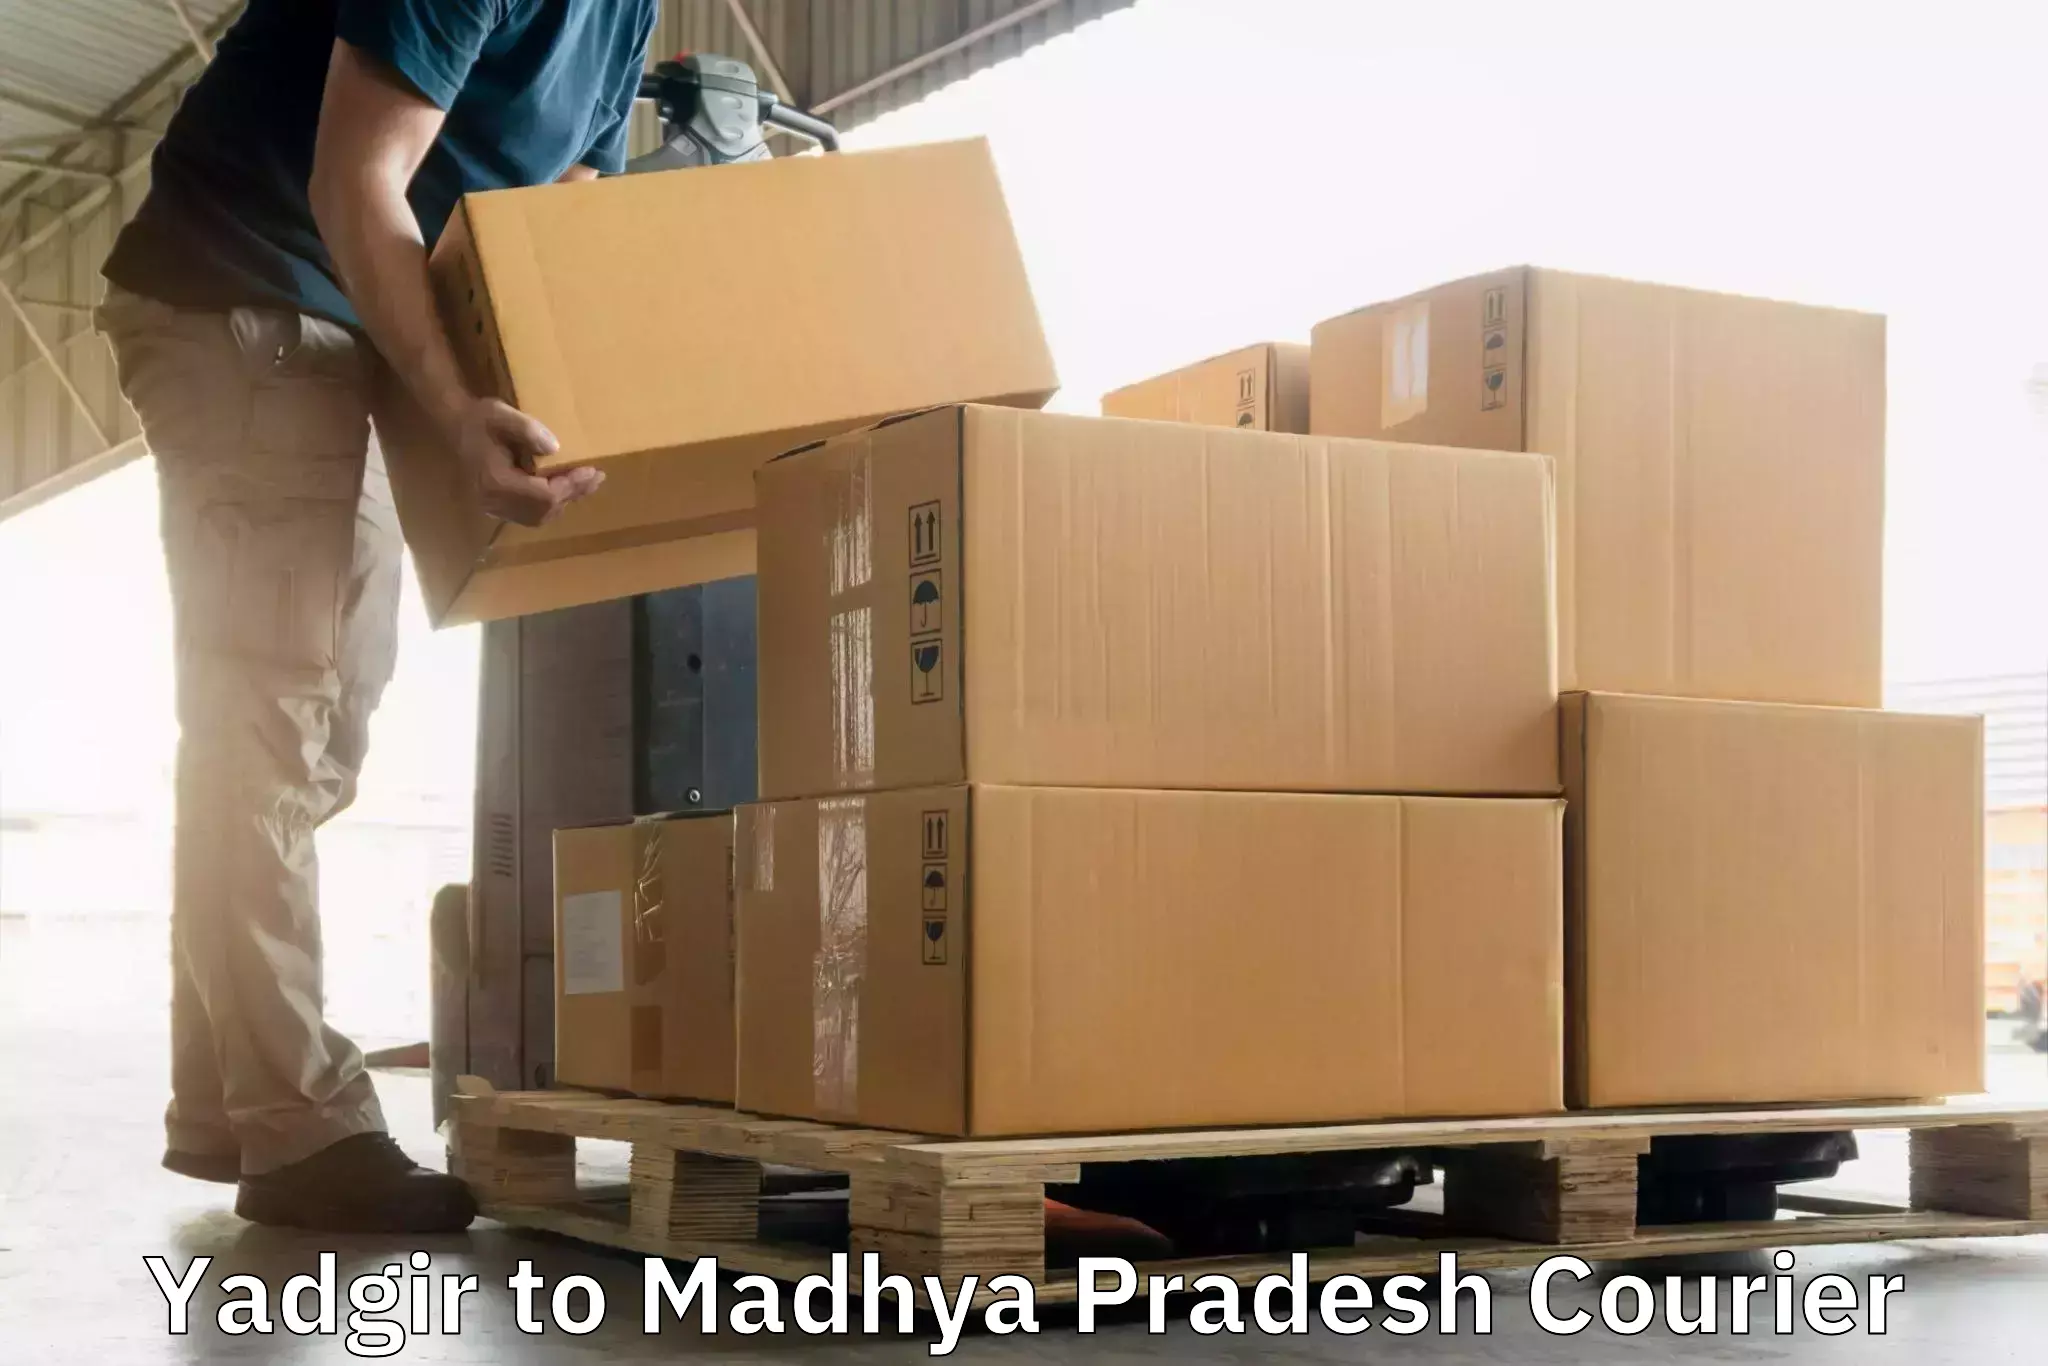 Professional parcel services Yadgir to Seoni